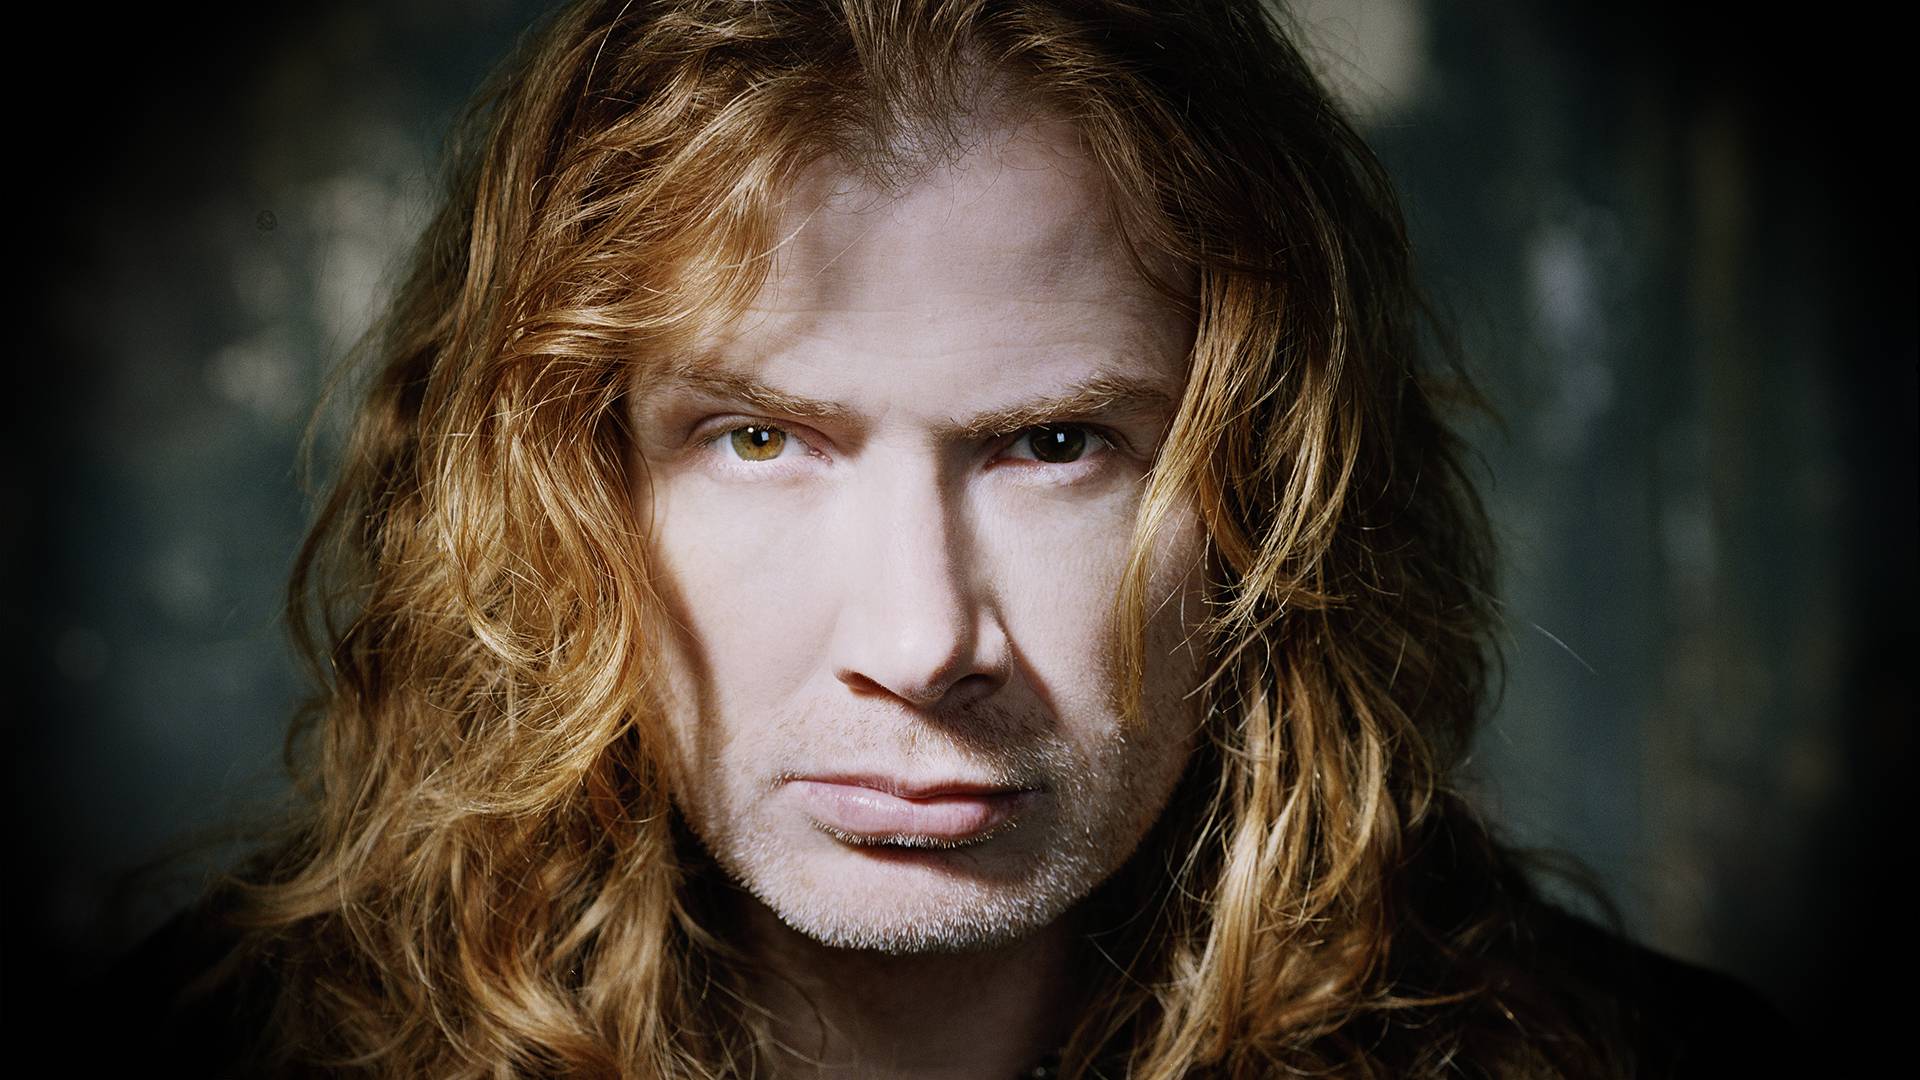 Dave Mustaine Wallpaper. Dave Mustaine Background